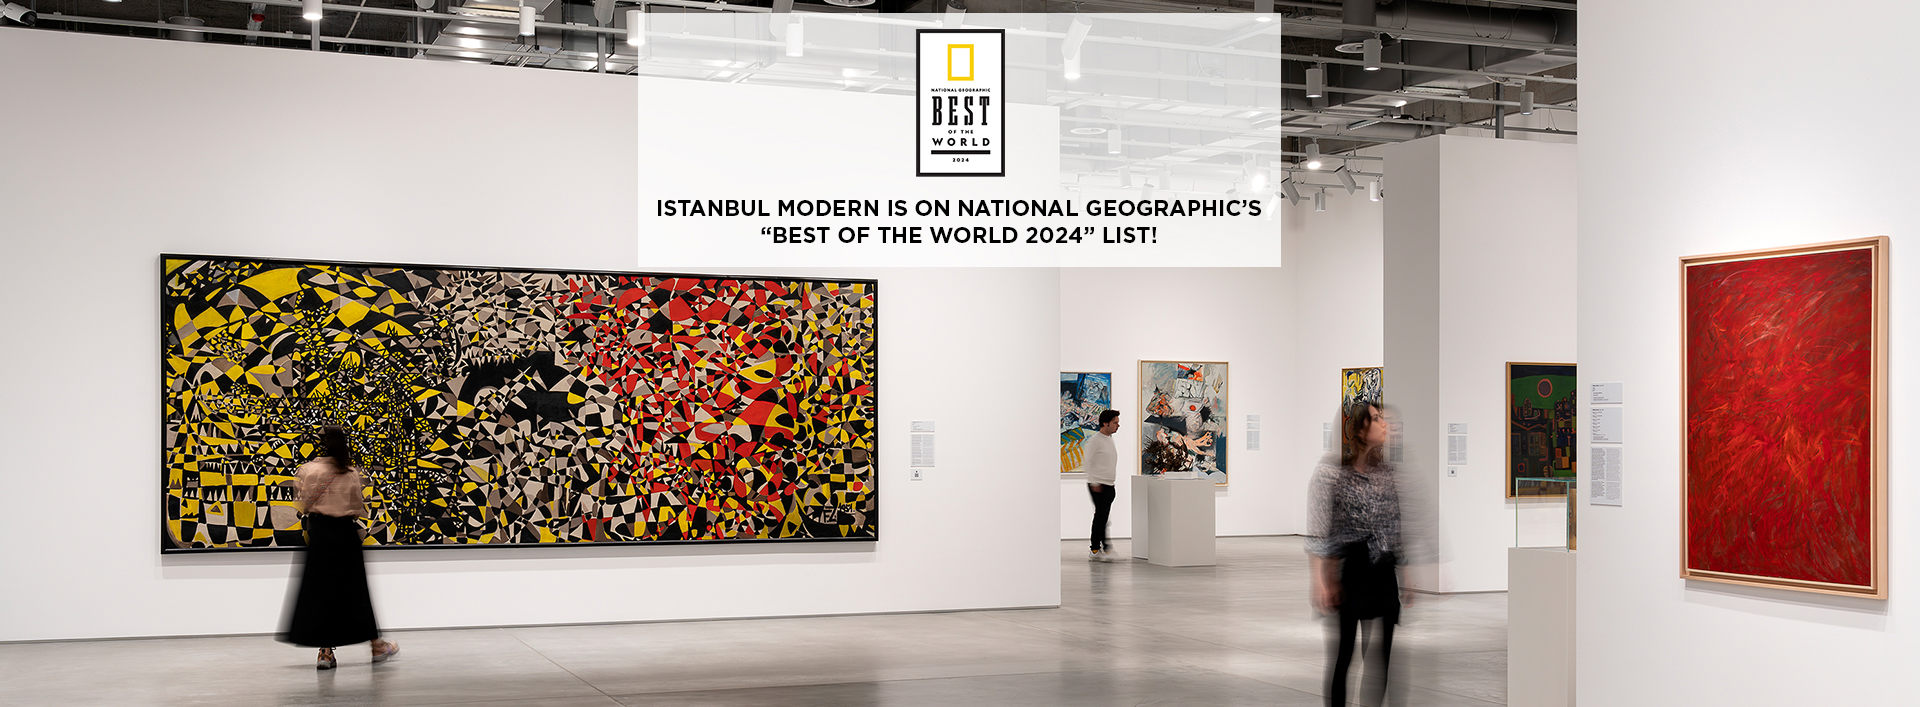 Istanbul Modern makes it to National Geographic’s “Best of the World” list!